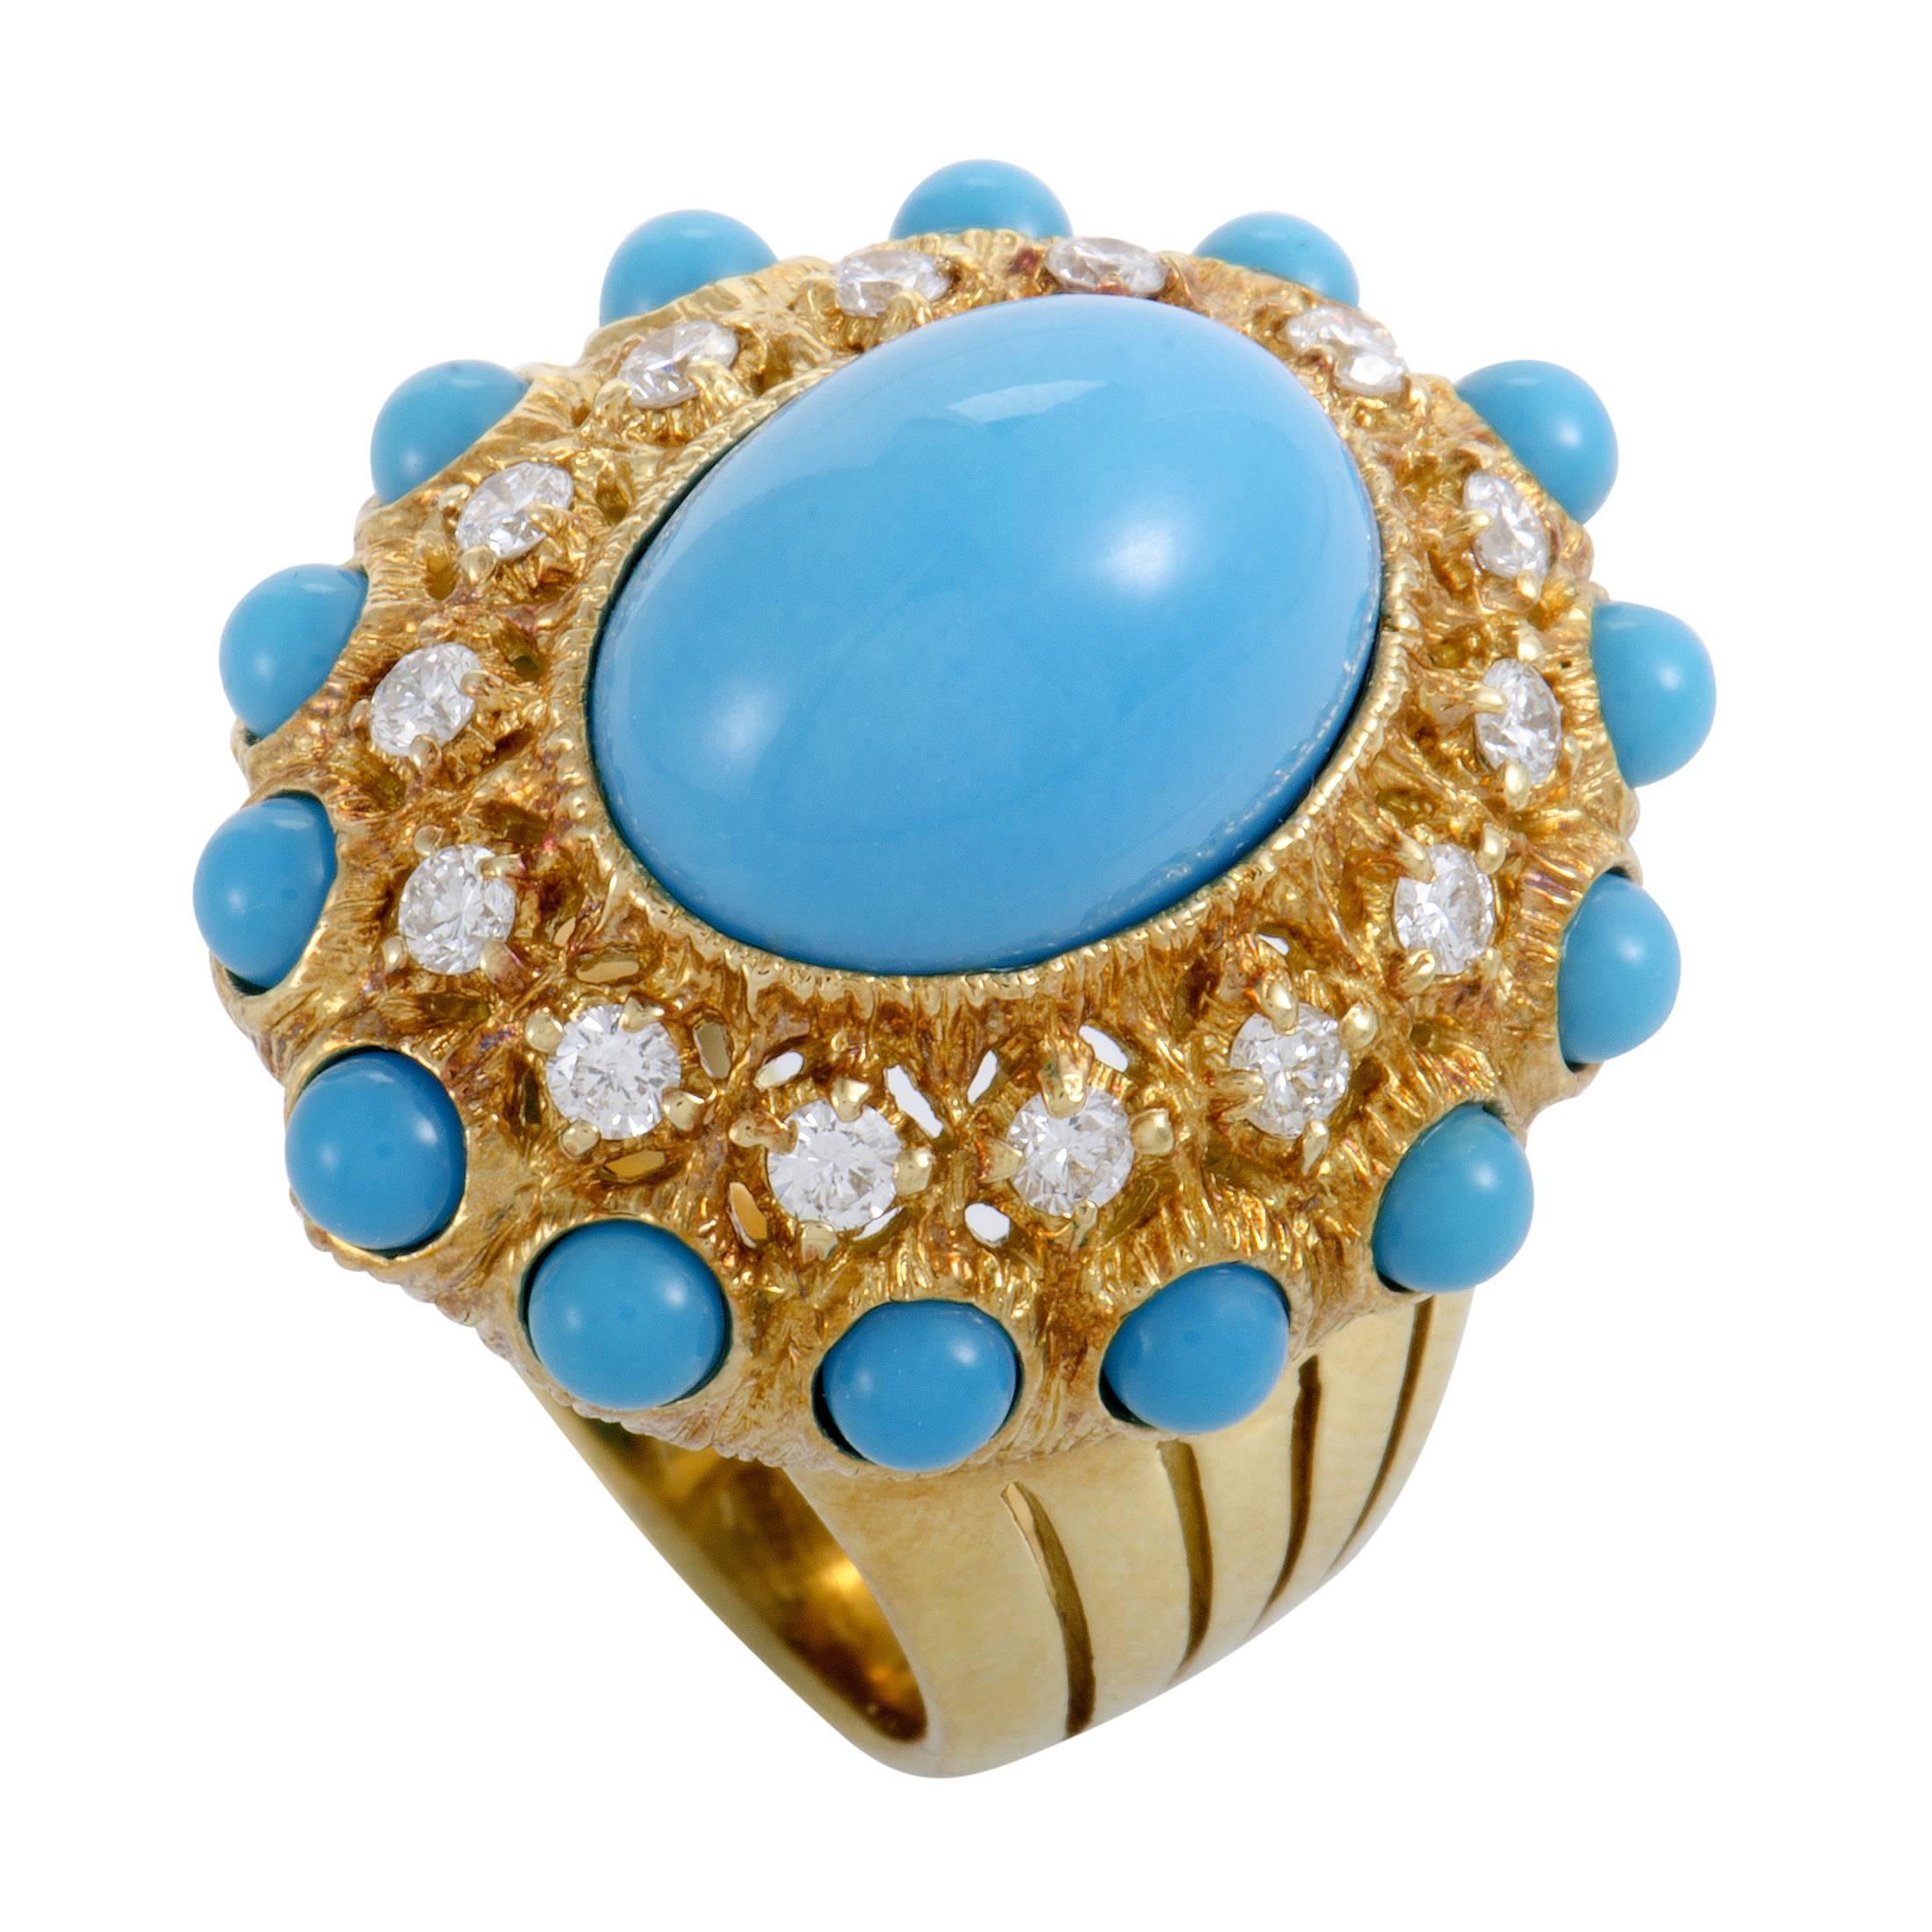 Brilliantly contrasting the passionate nuance and exuberance of 18K yellow gold with their pastel color and splendid appeal, the turquoise stones set a marvelous tone in this gorgeous set which is comprised of a nifty ring and charming earrings,